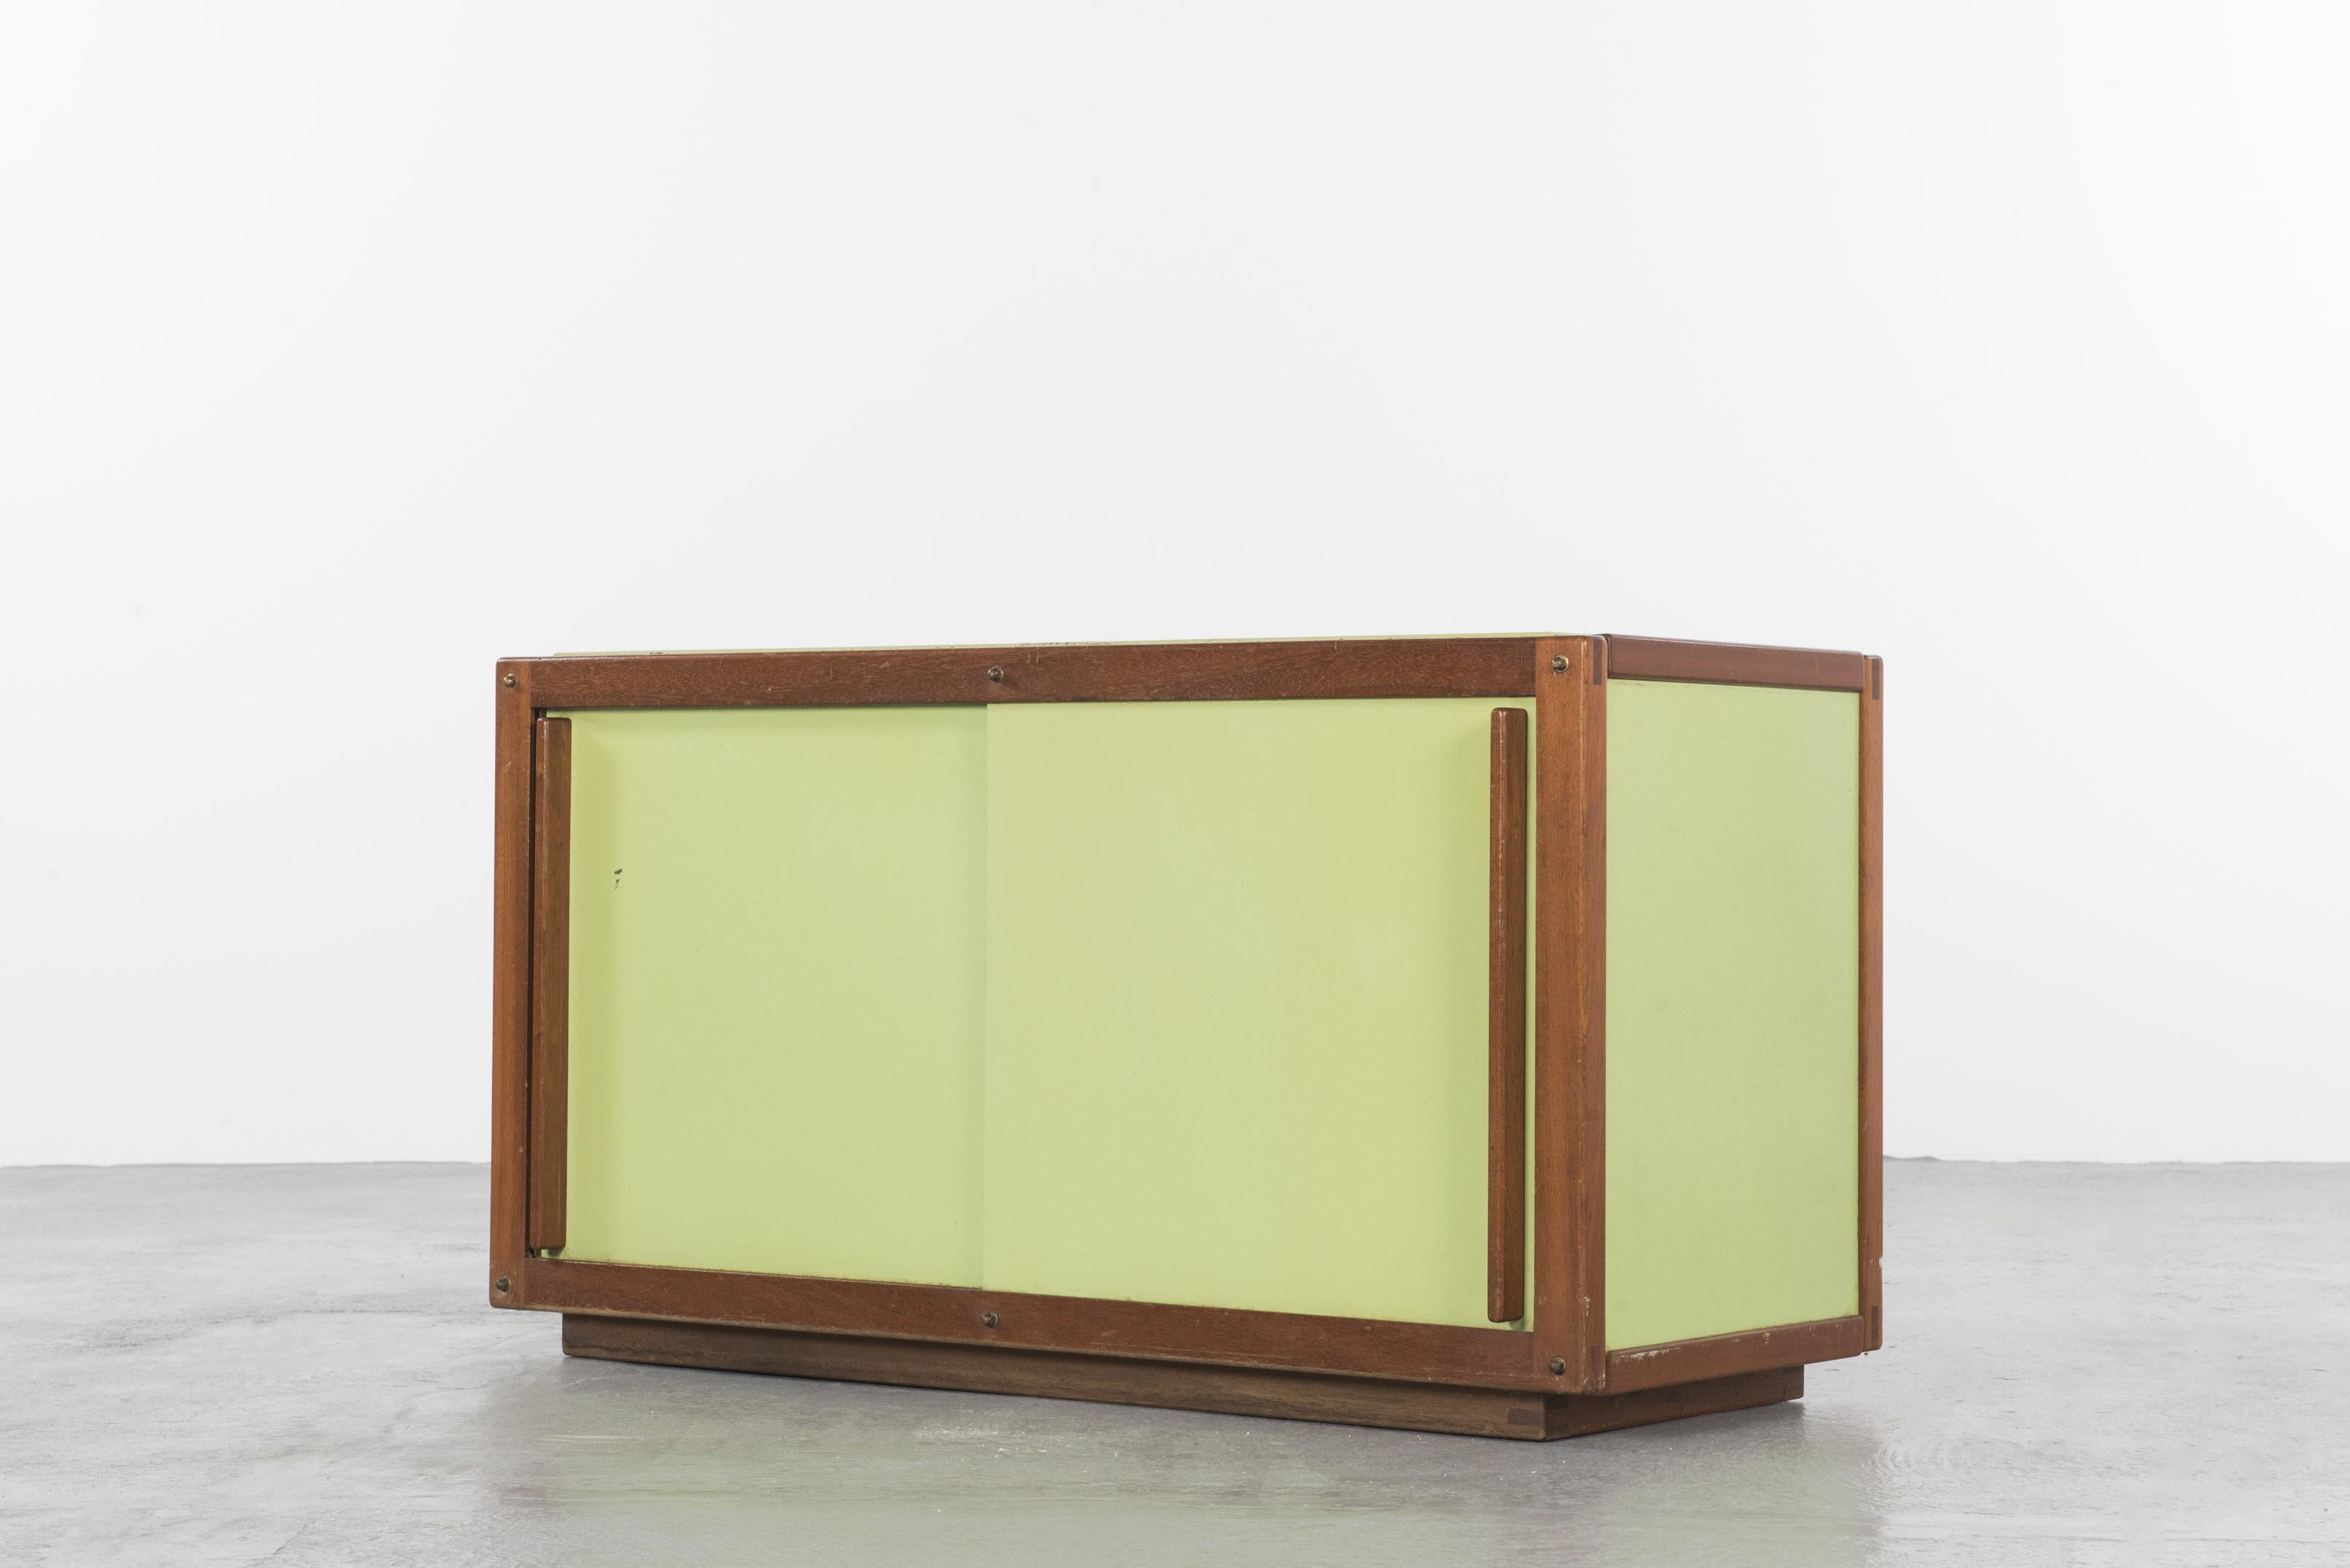 Cabinet in mahogany with 2 lacquered sliding doors designed by French designer André Sornay, circa 1955.
Original classic green.
In very good condition.

This small and elegant piece of furniture is one a series of lacquered cabinets in